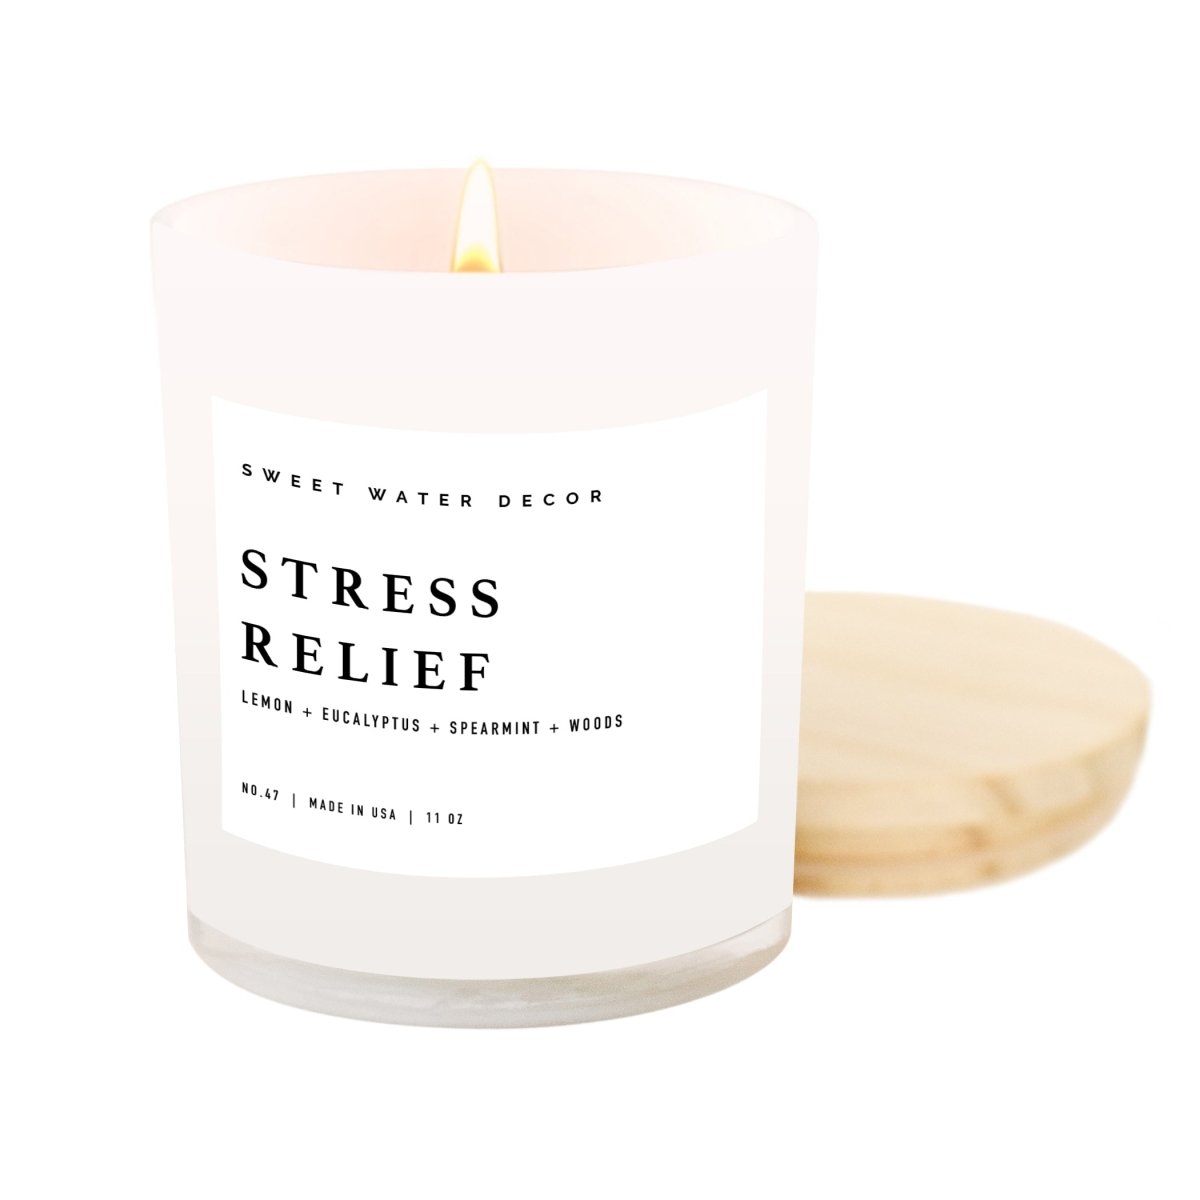 Sweet Water Decor Stress Relief Soy Candle - White Jar - 11 oz - lily & onyx